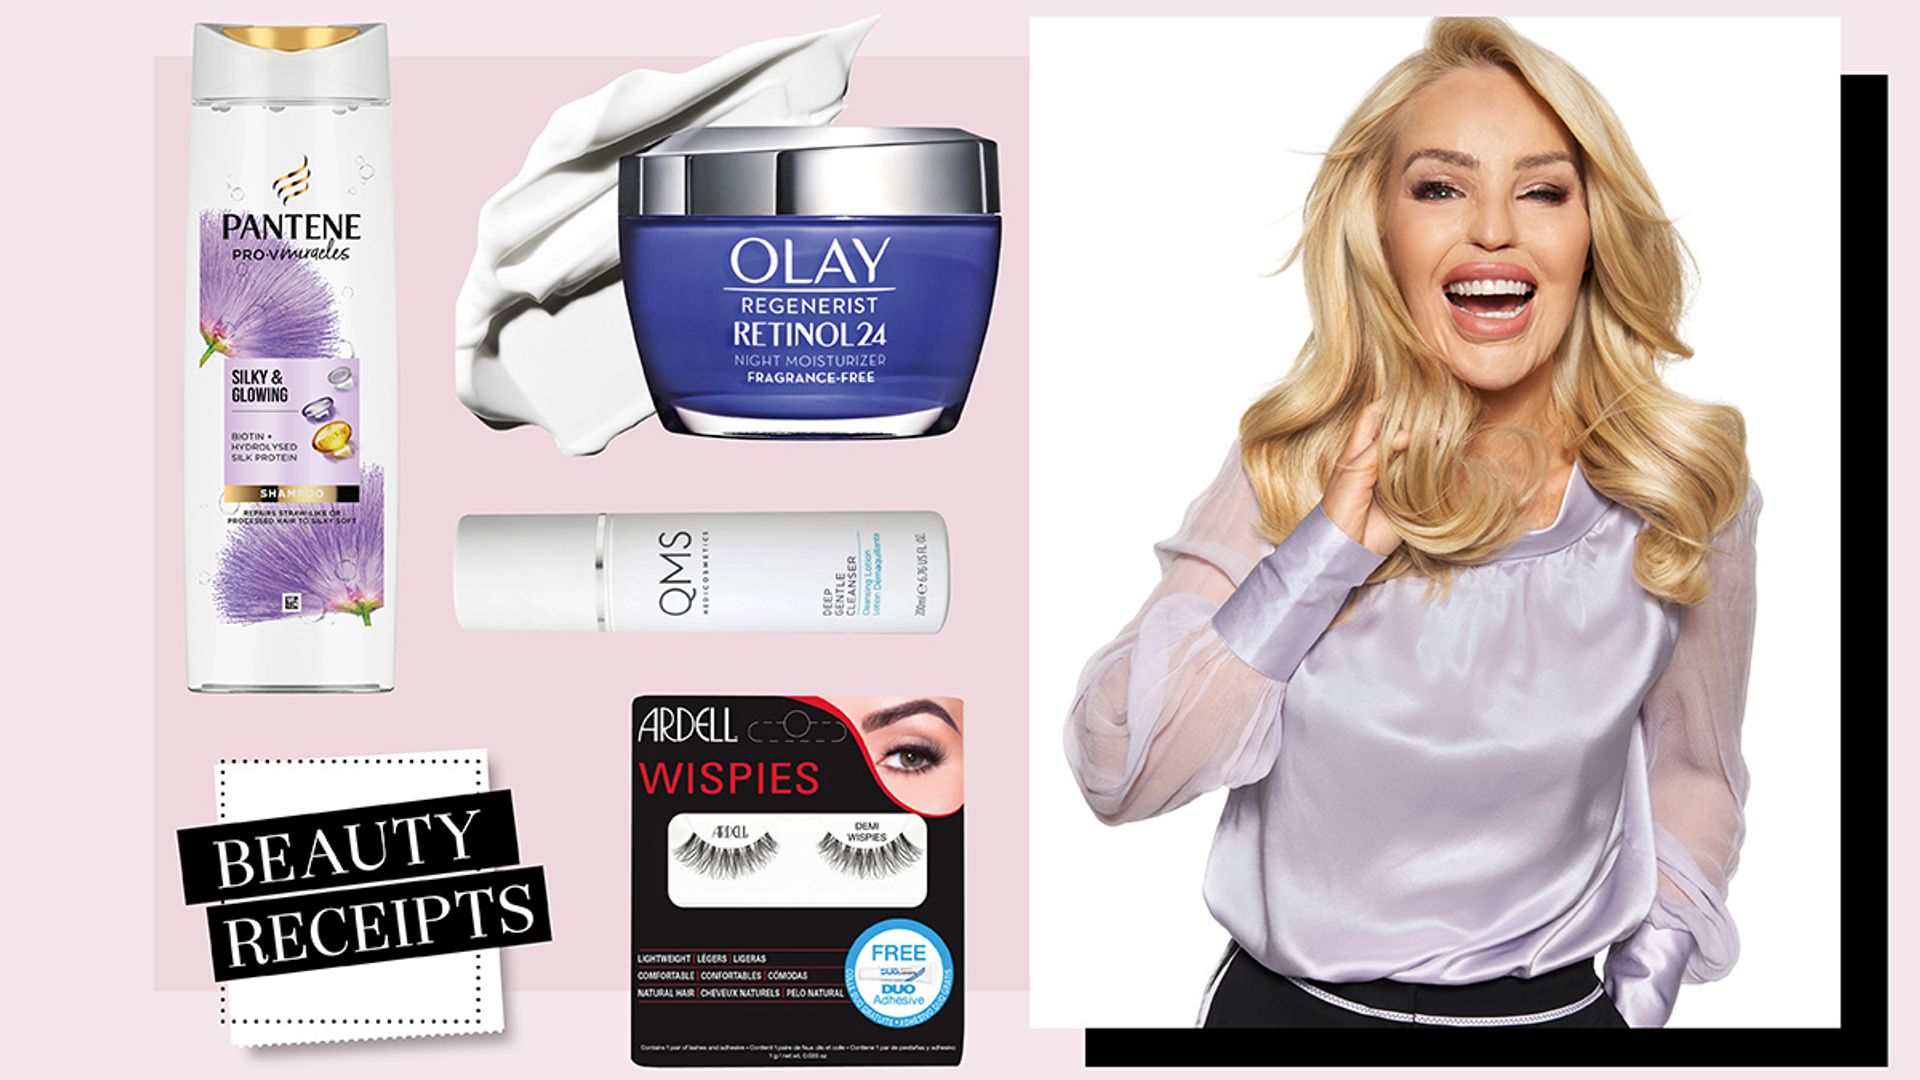 Beauty Receipts: What Katie Piper's monthly beauty routine looks like